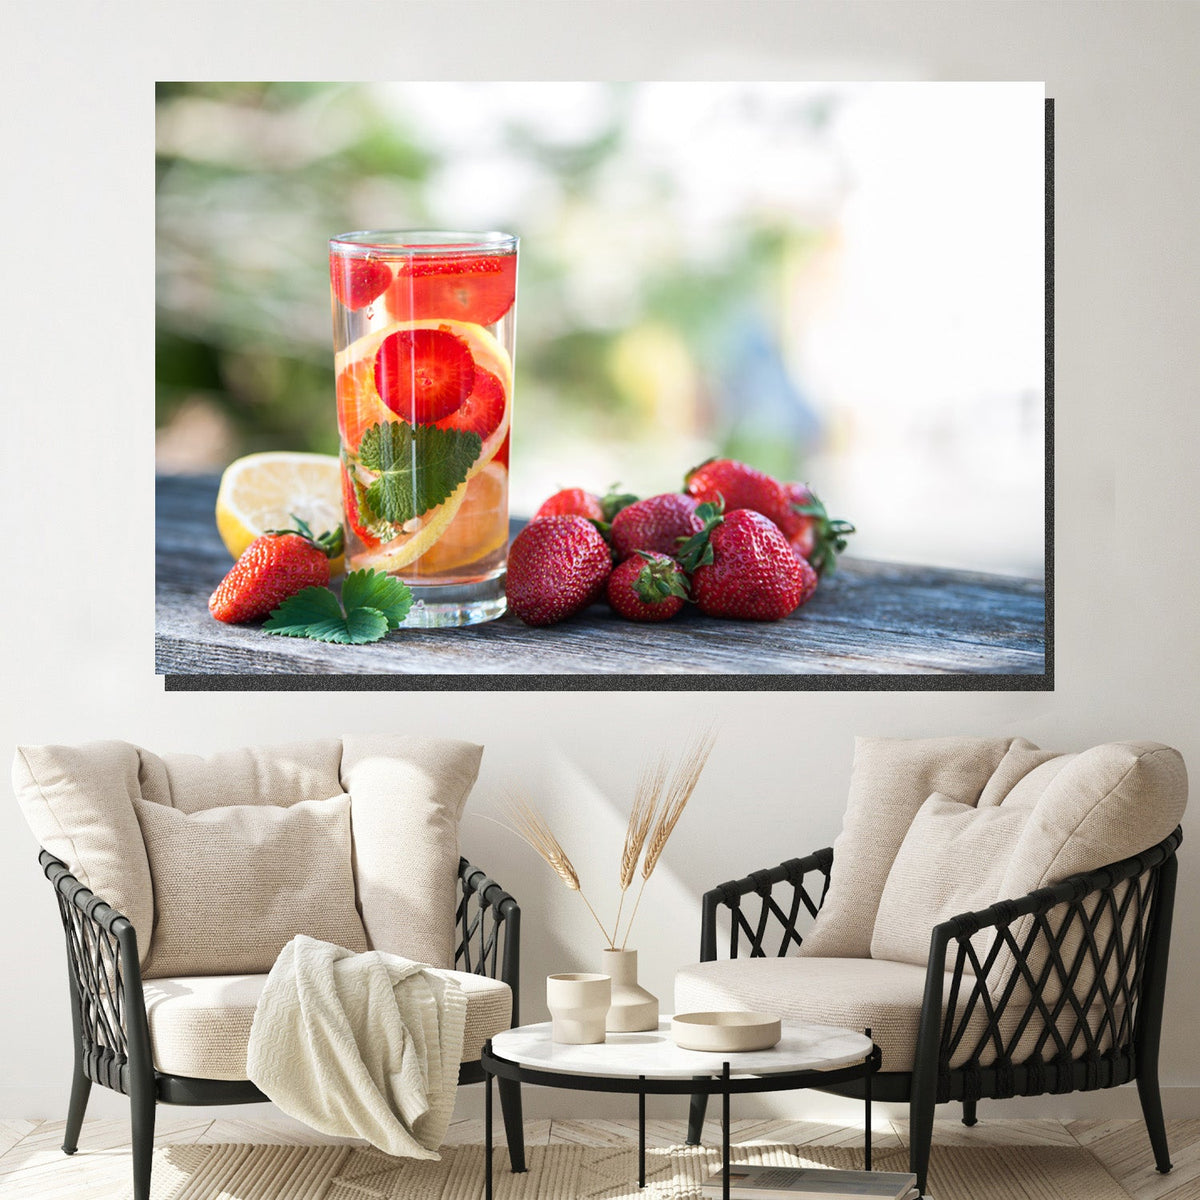 https://cdn.shopify.com/s/files/1/0387/9986/8044/products/StrawberryCleanseCanvasArtprintStretched-4.jpg